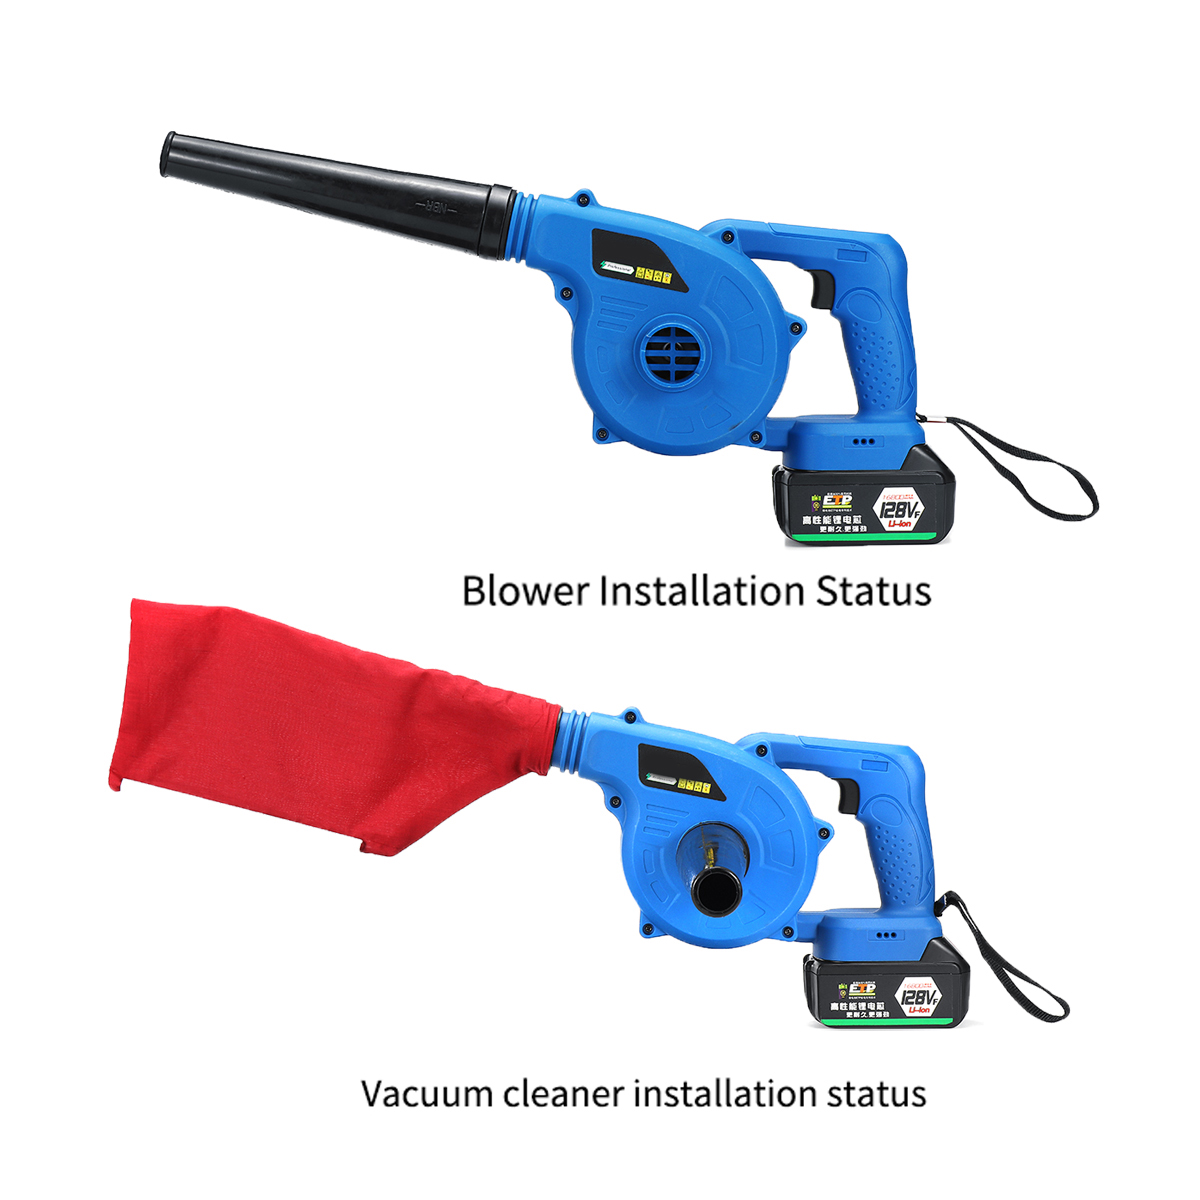 220v-1200W-Electric-Wireless-Handheld-Blower-Computer-Dust-Collector-Rechargeable-Lithium-One-Batter-1562214-8